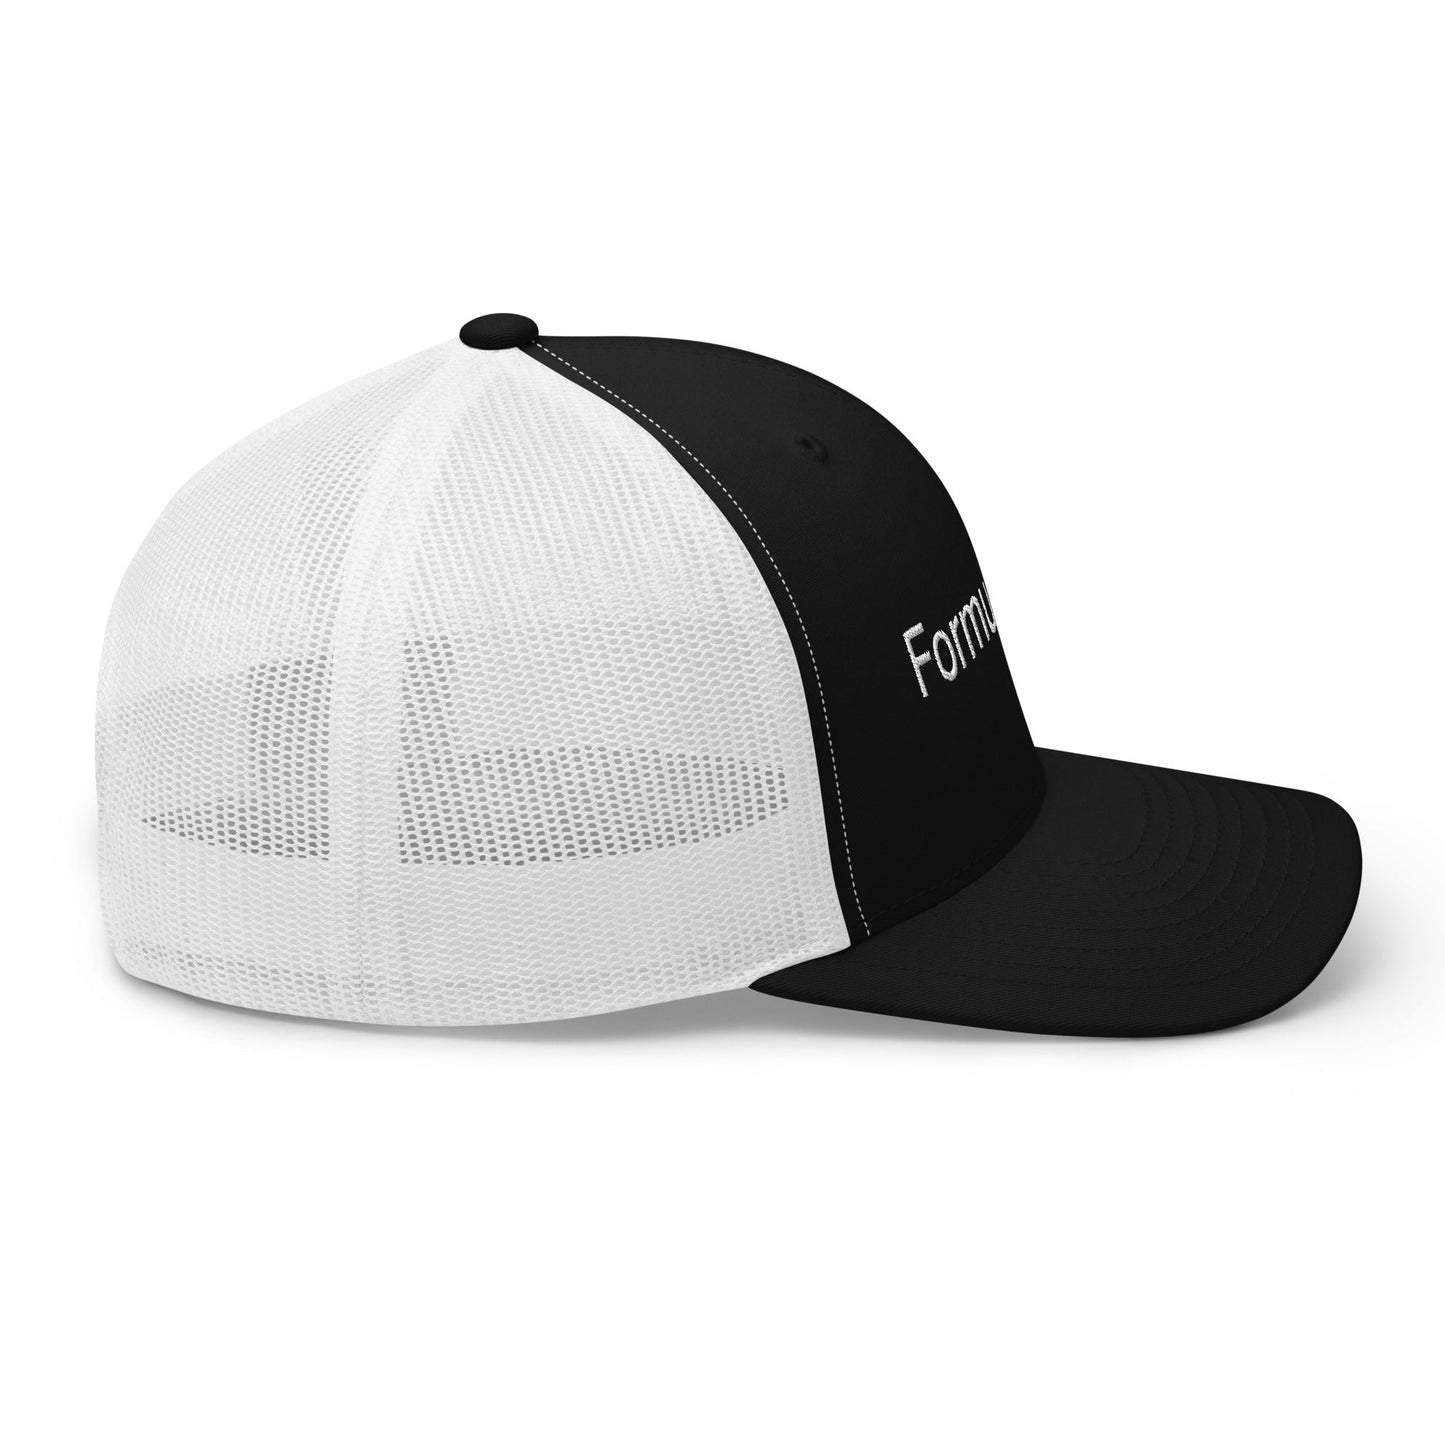 FORMULA FORD Official Embroidered Trucker Cap - carbon/white